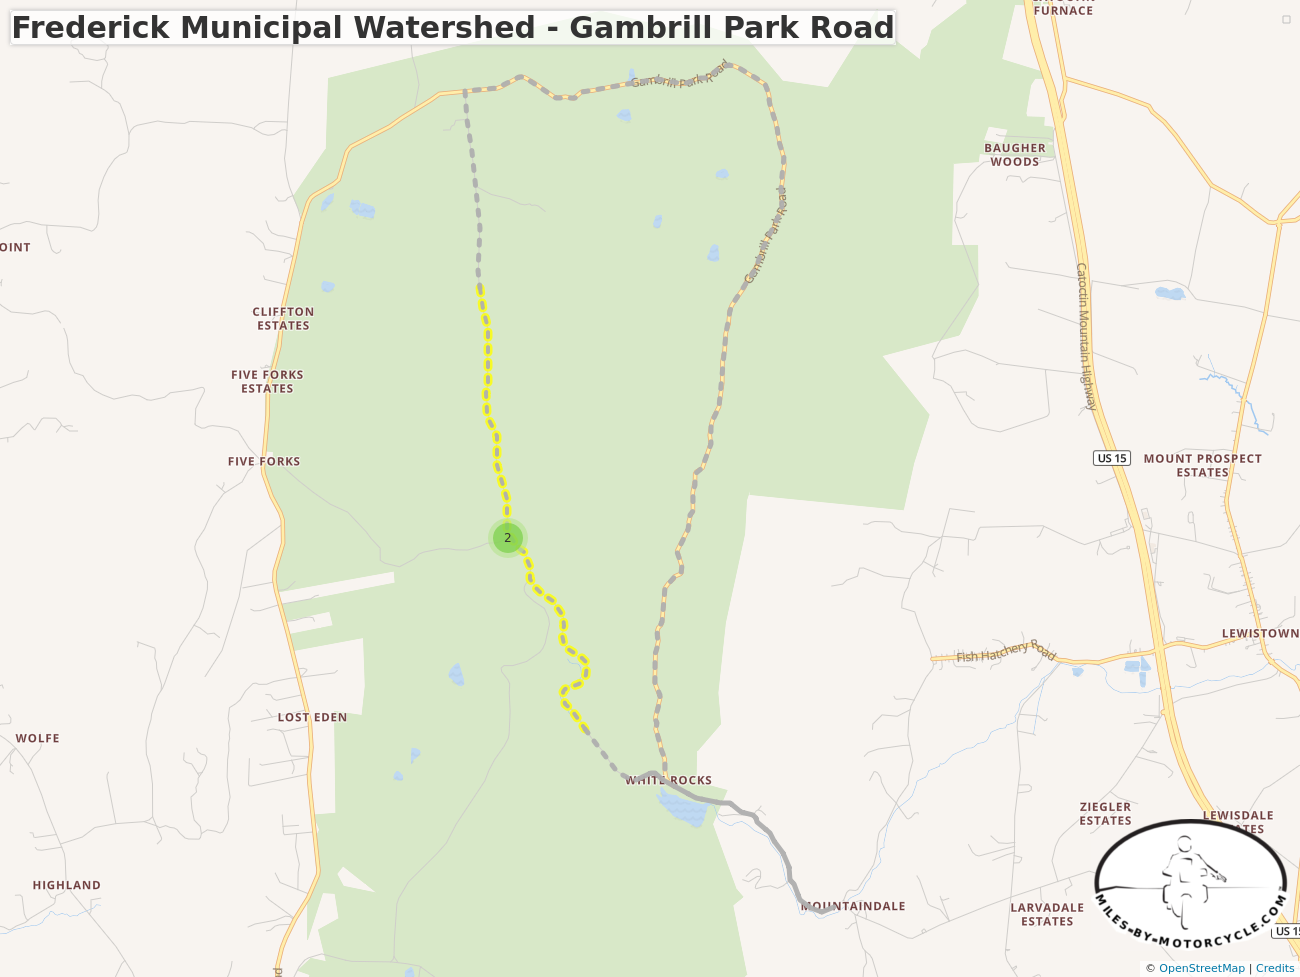 Frederick Municipal Watershed - Gambrill Park Road